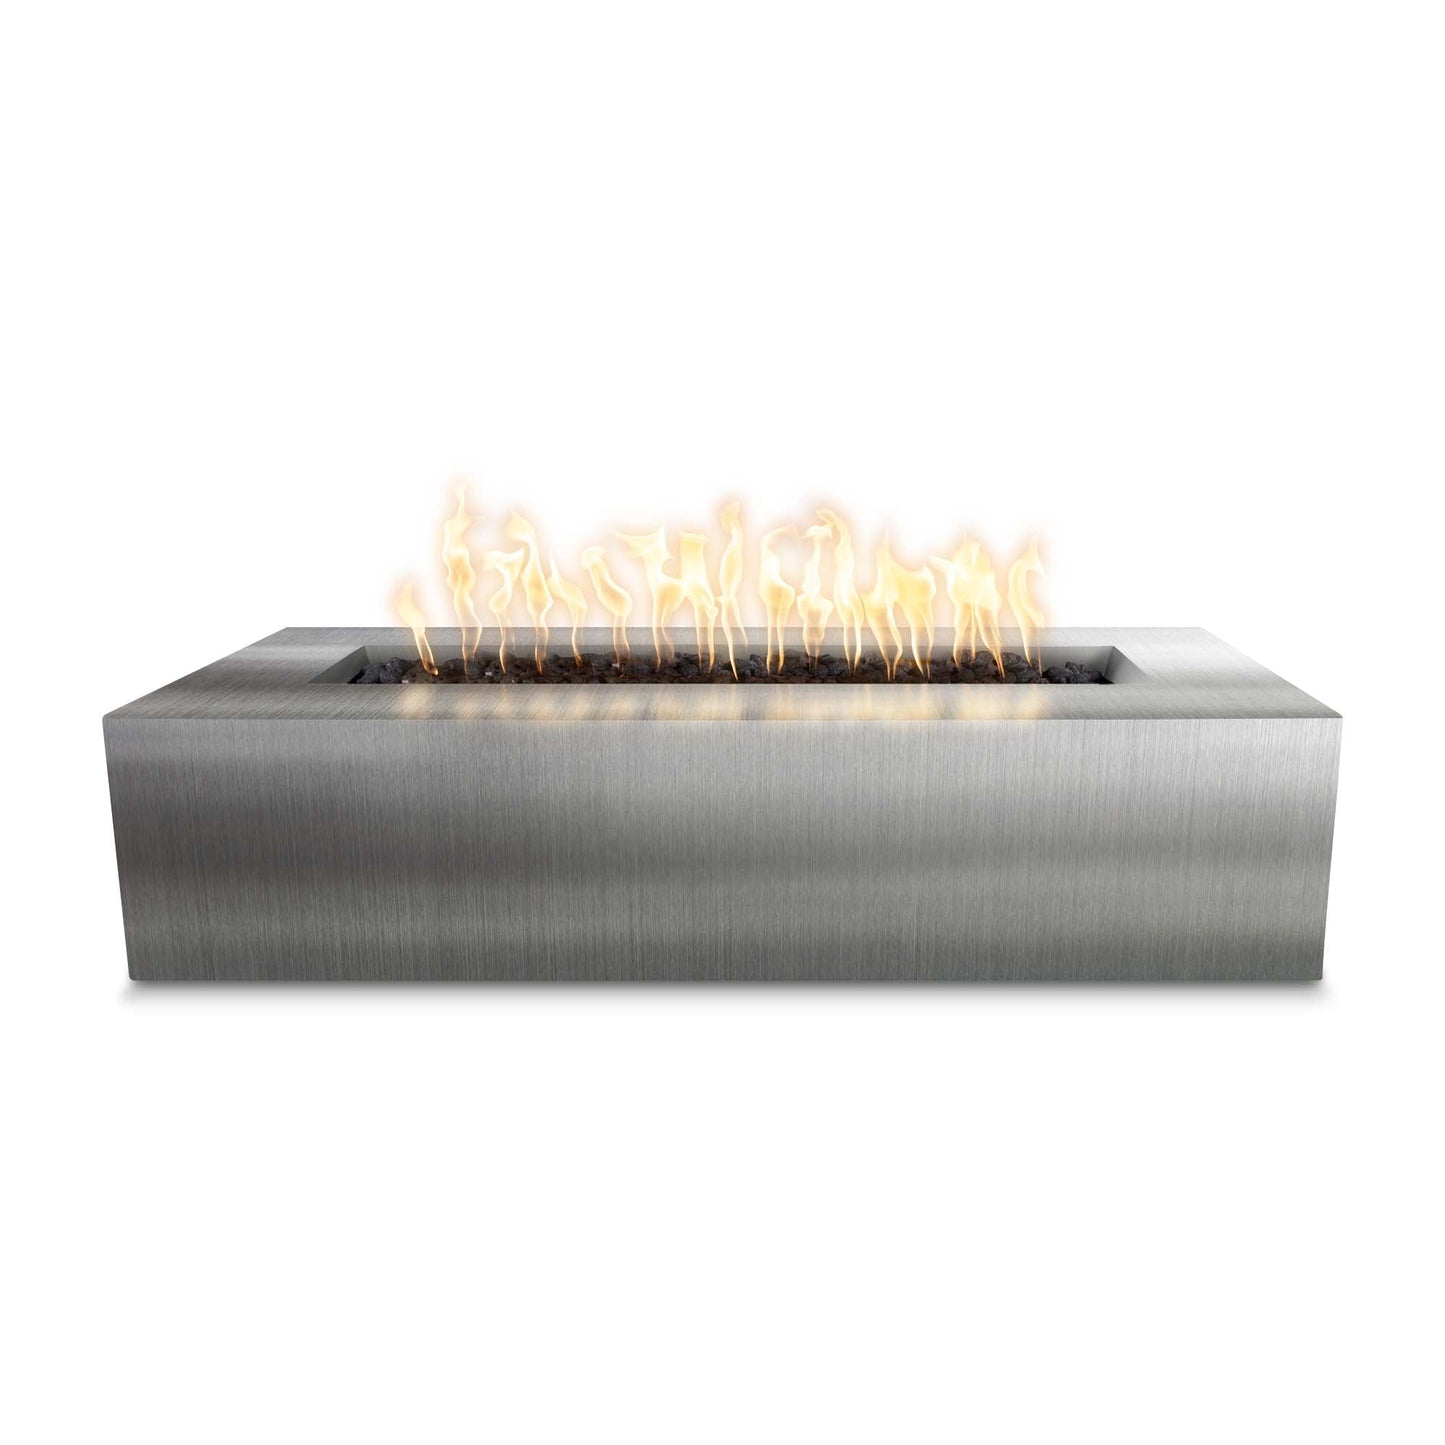 The Outdoor Plus Rectangular Regal 60" Corten Steel Liquid Propane Fire Pit with 12V Electronic Ignition